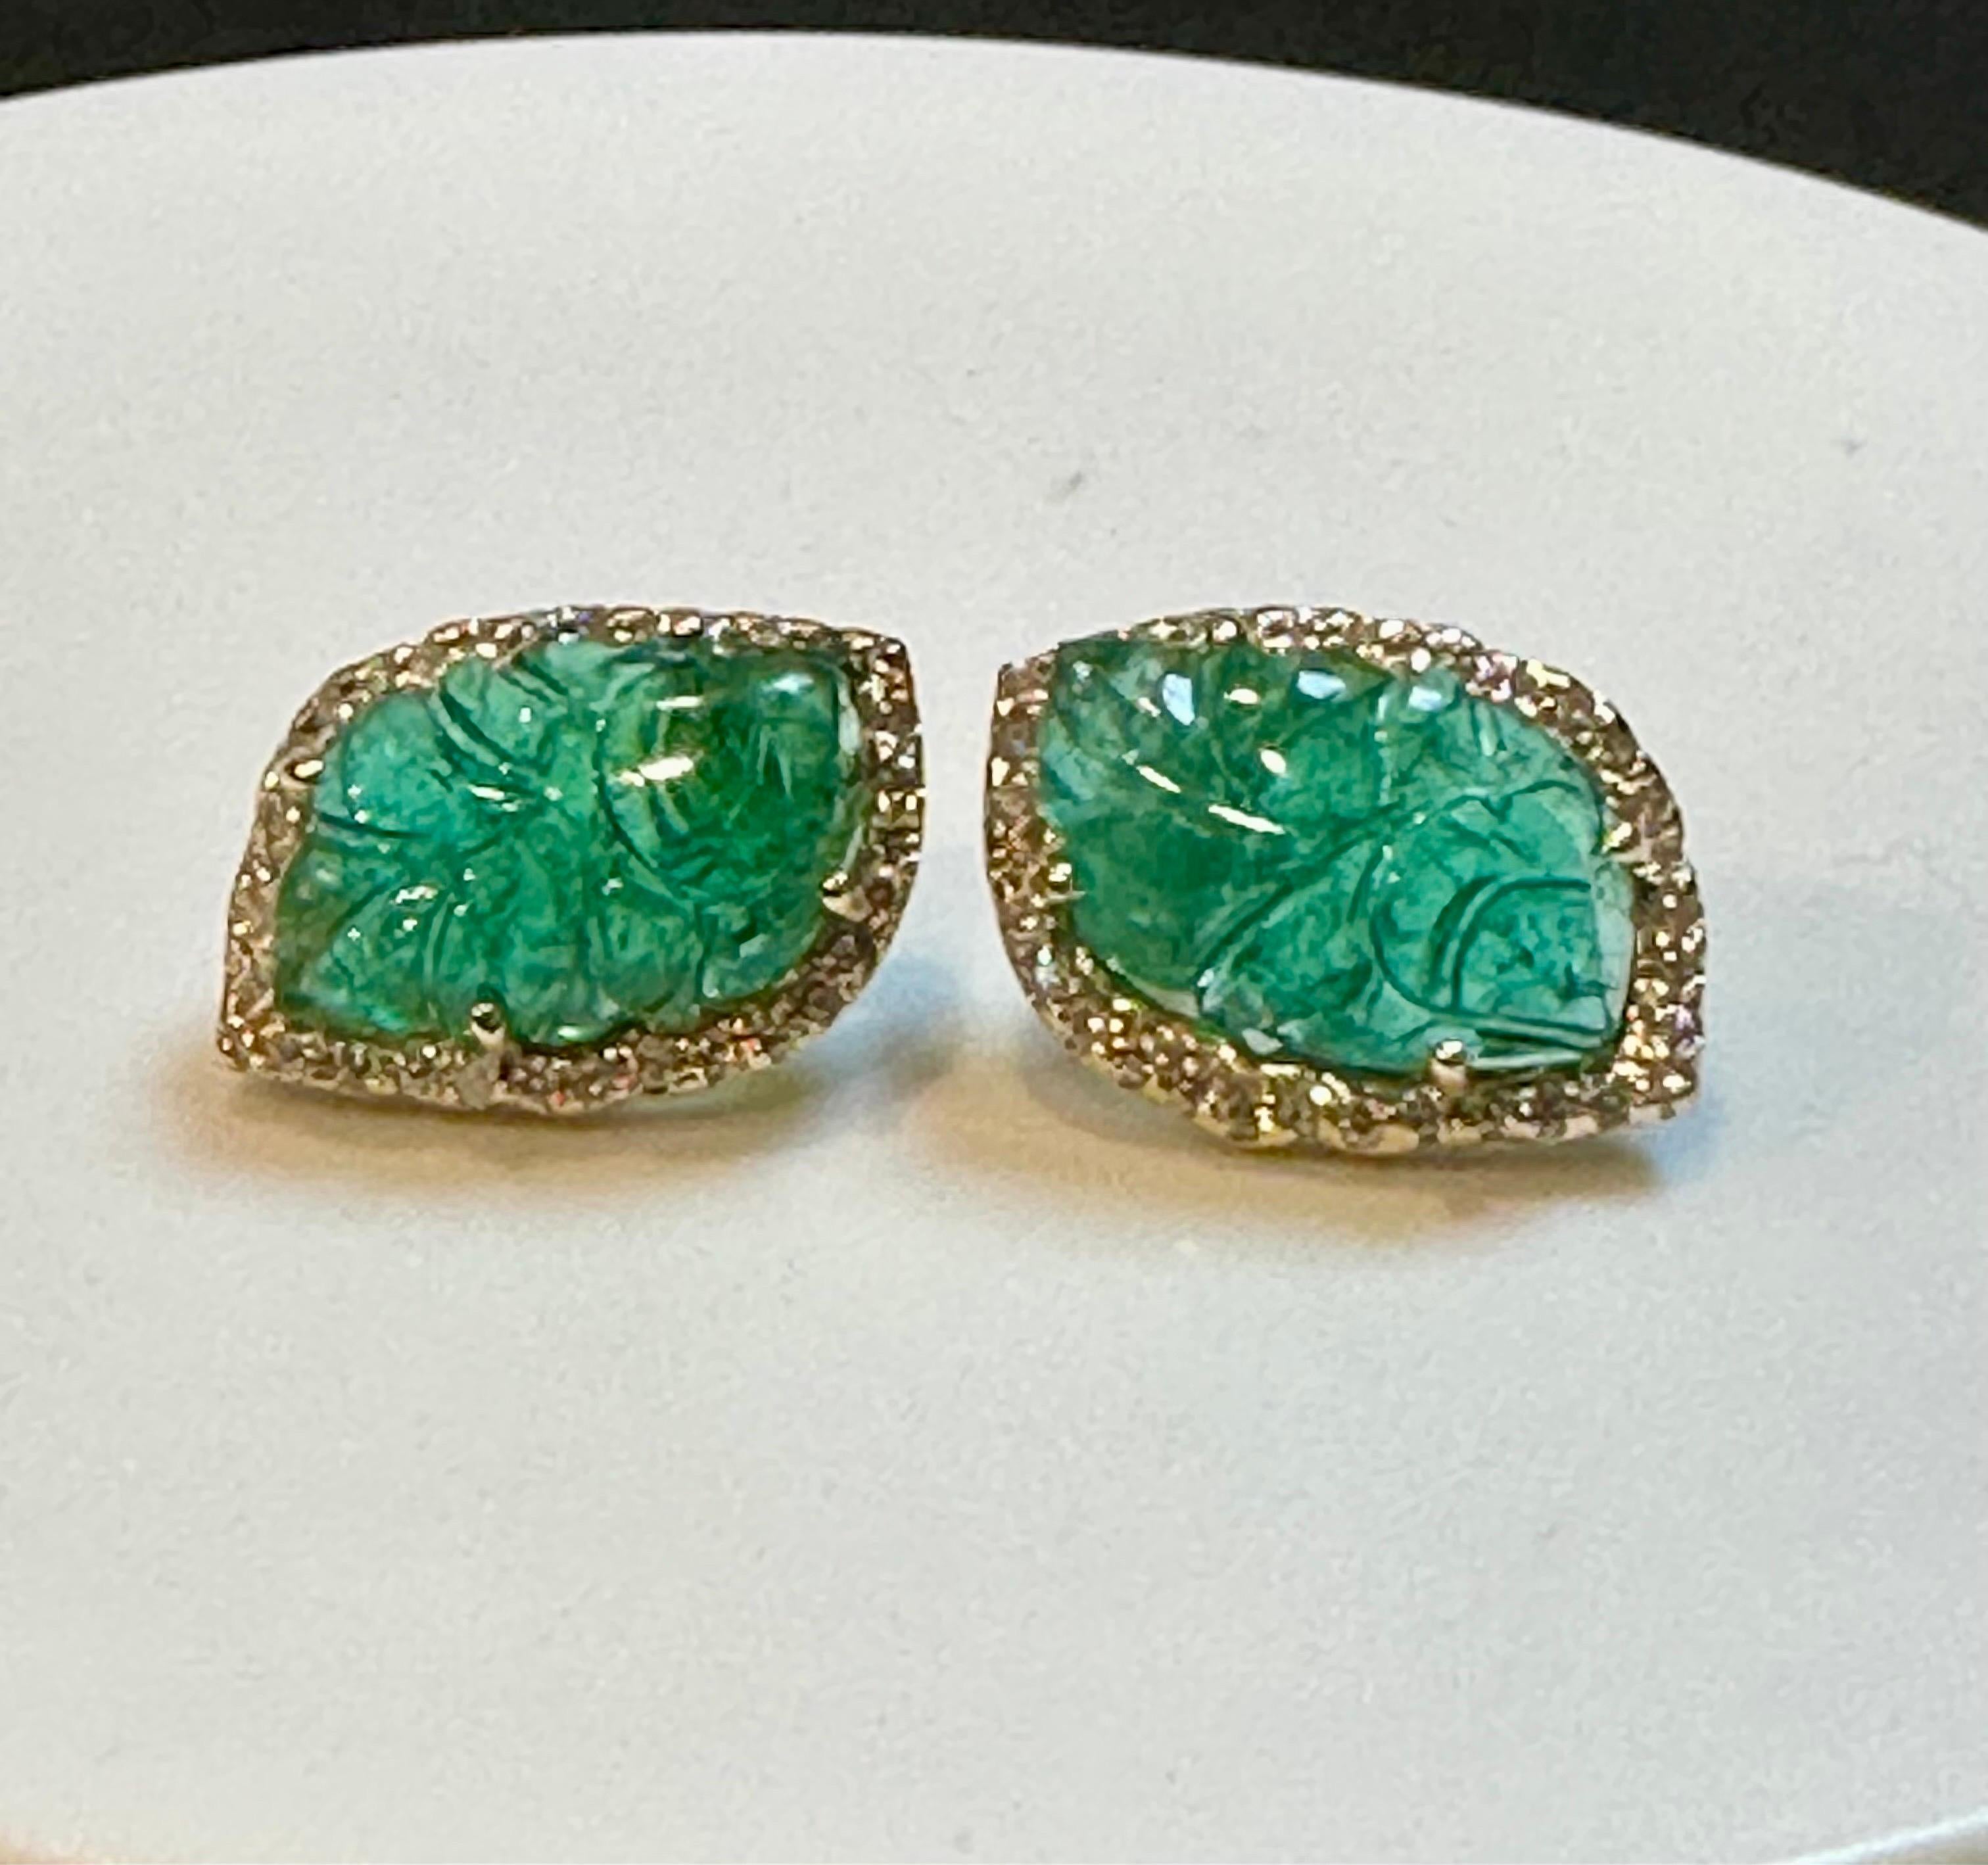 22 Ct Carved Emerald & 2 Ct Diamond Earrings 14 Karat Yellow Gold Post Earrings For Sale 2